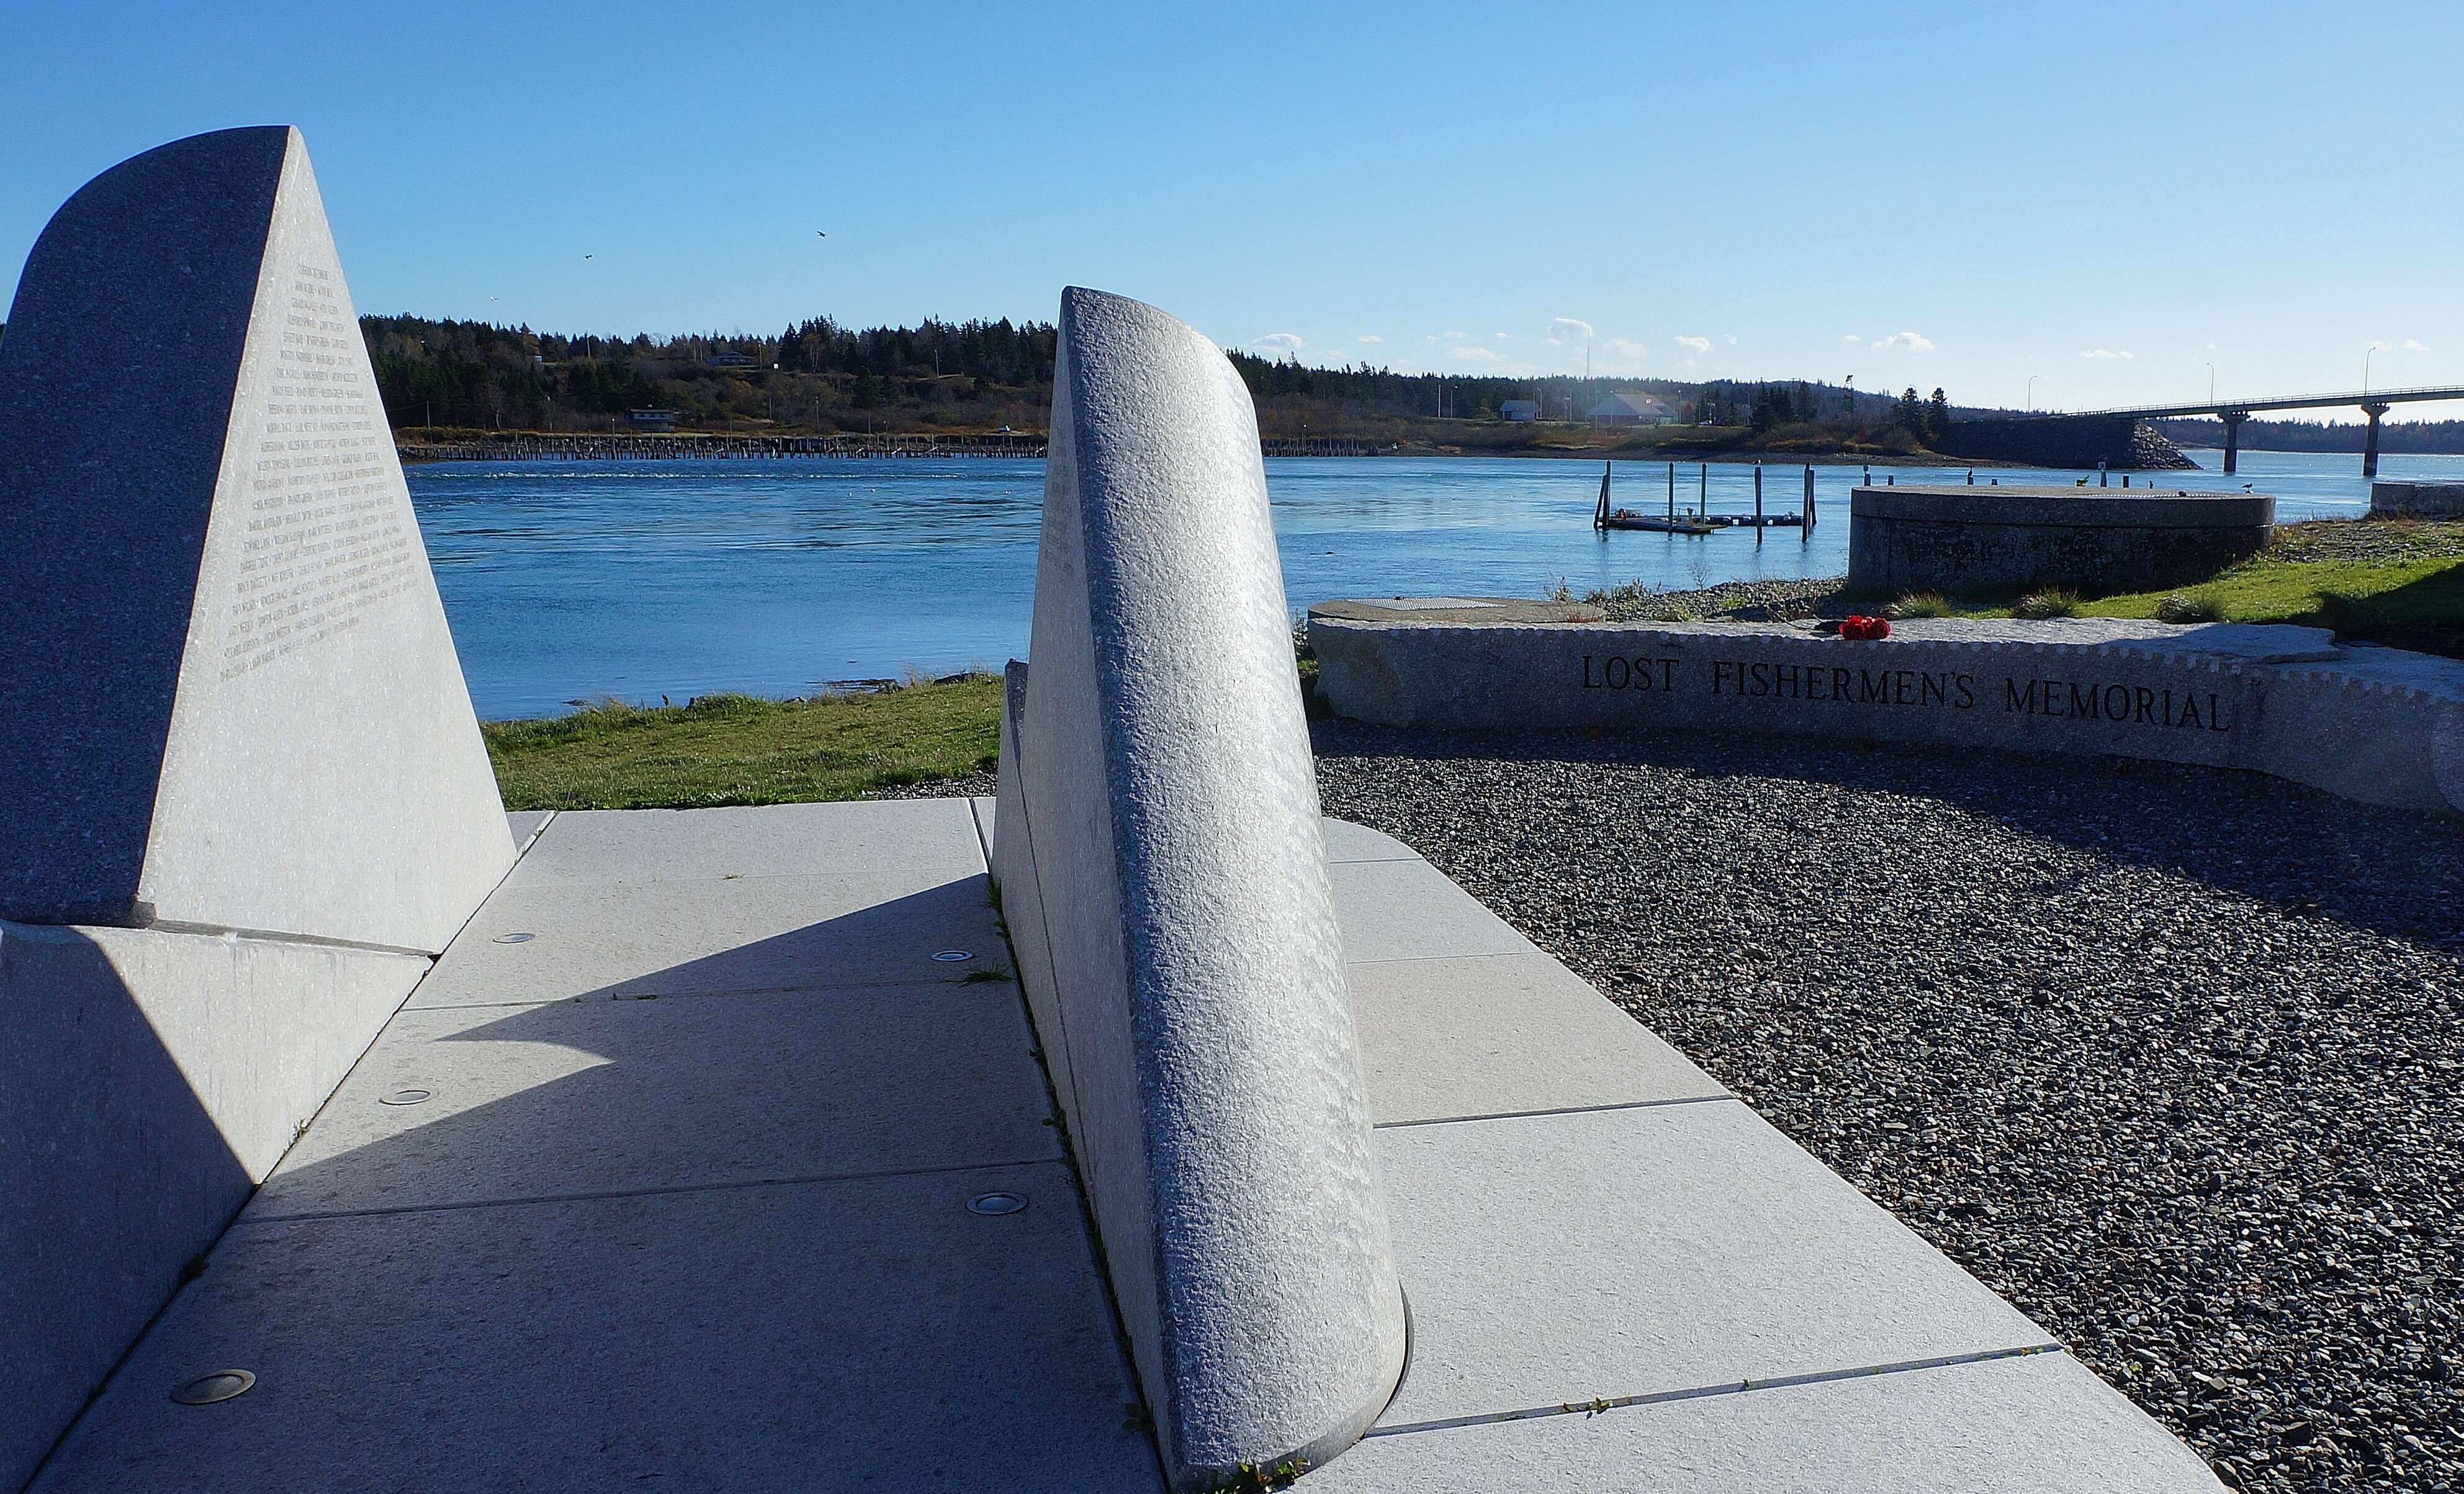 A granite memorial shaped like ocean waves with names on it and the ocean in the background